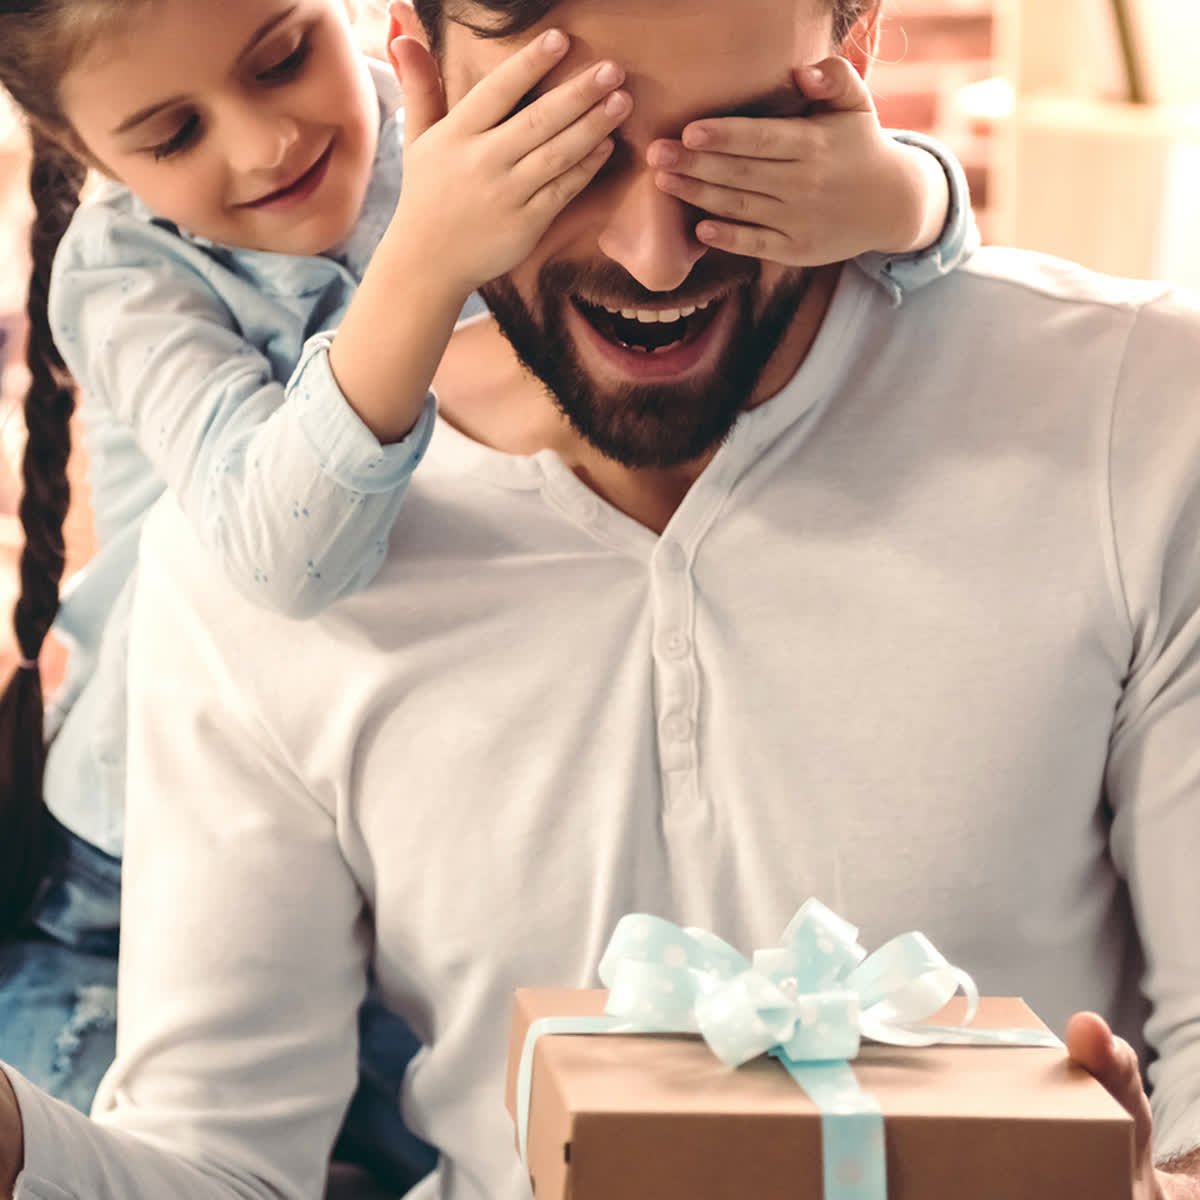 👉When you buy more, you save more. This Father's day, when you get dad a new phone, save $50 on his new #galaxywatch as well! 
🚶‍♀️Come in to your local MBA store to take advantage of this hot deal. 
▫
#mba #verizonwireless #verizon #verizondeal #phonedeal #galaxywatch